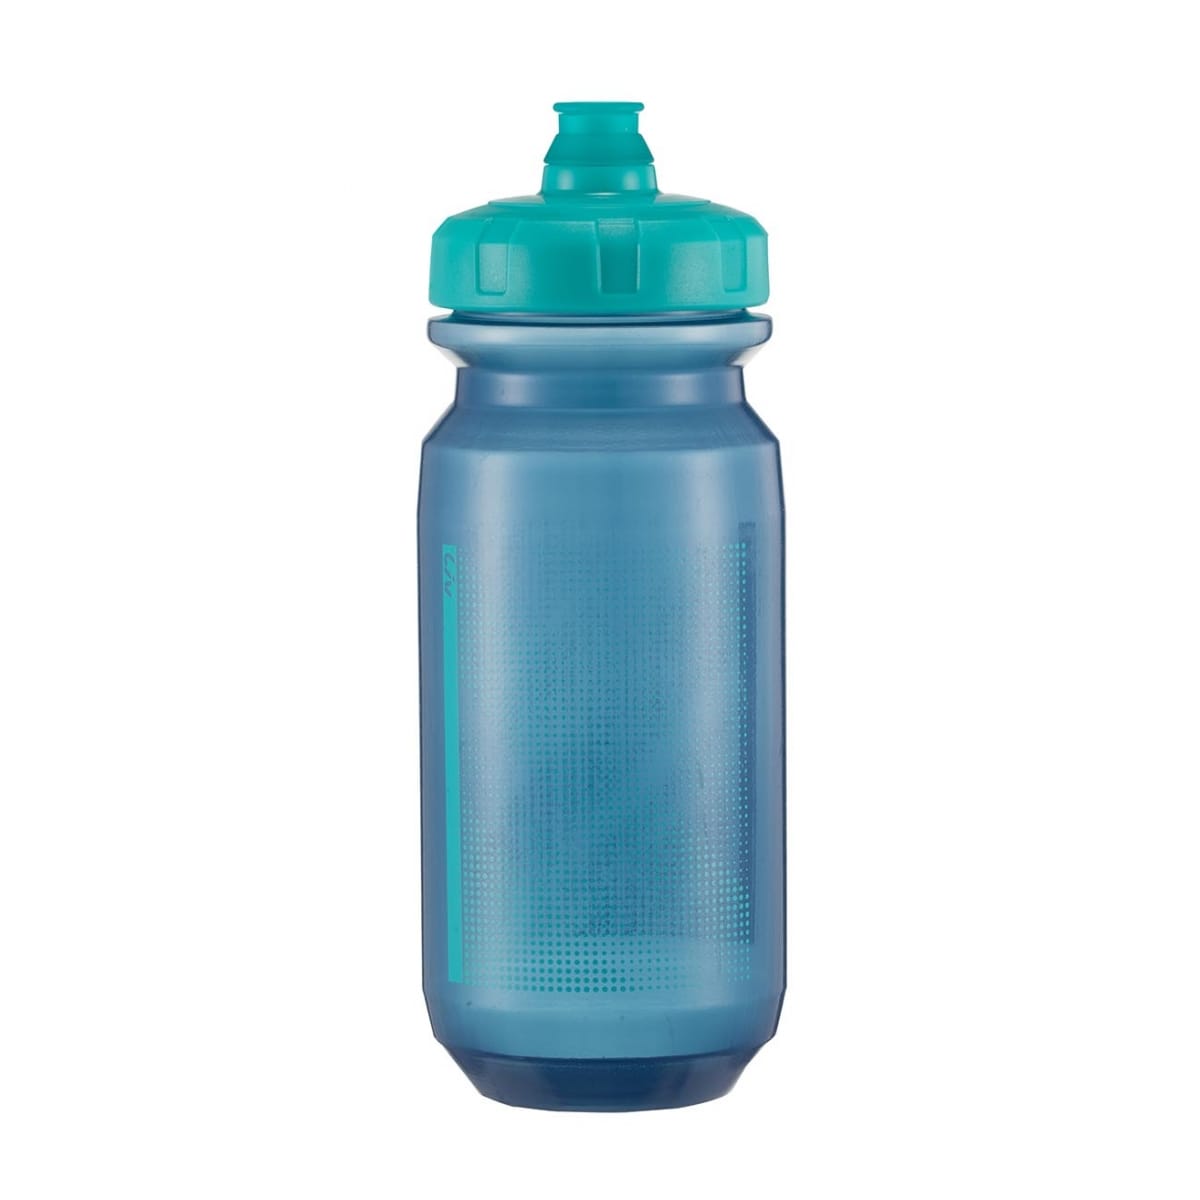 GIANT LIV DOUBLE SPRING WATER BOTTLE 600CC - GREEN BLUE